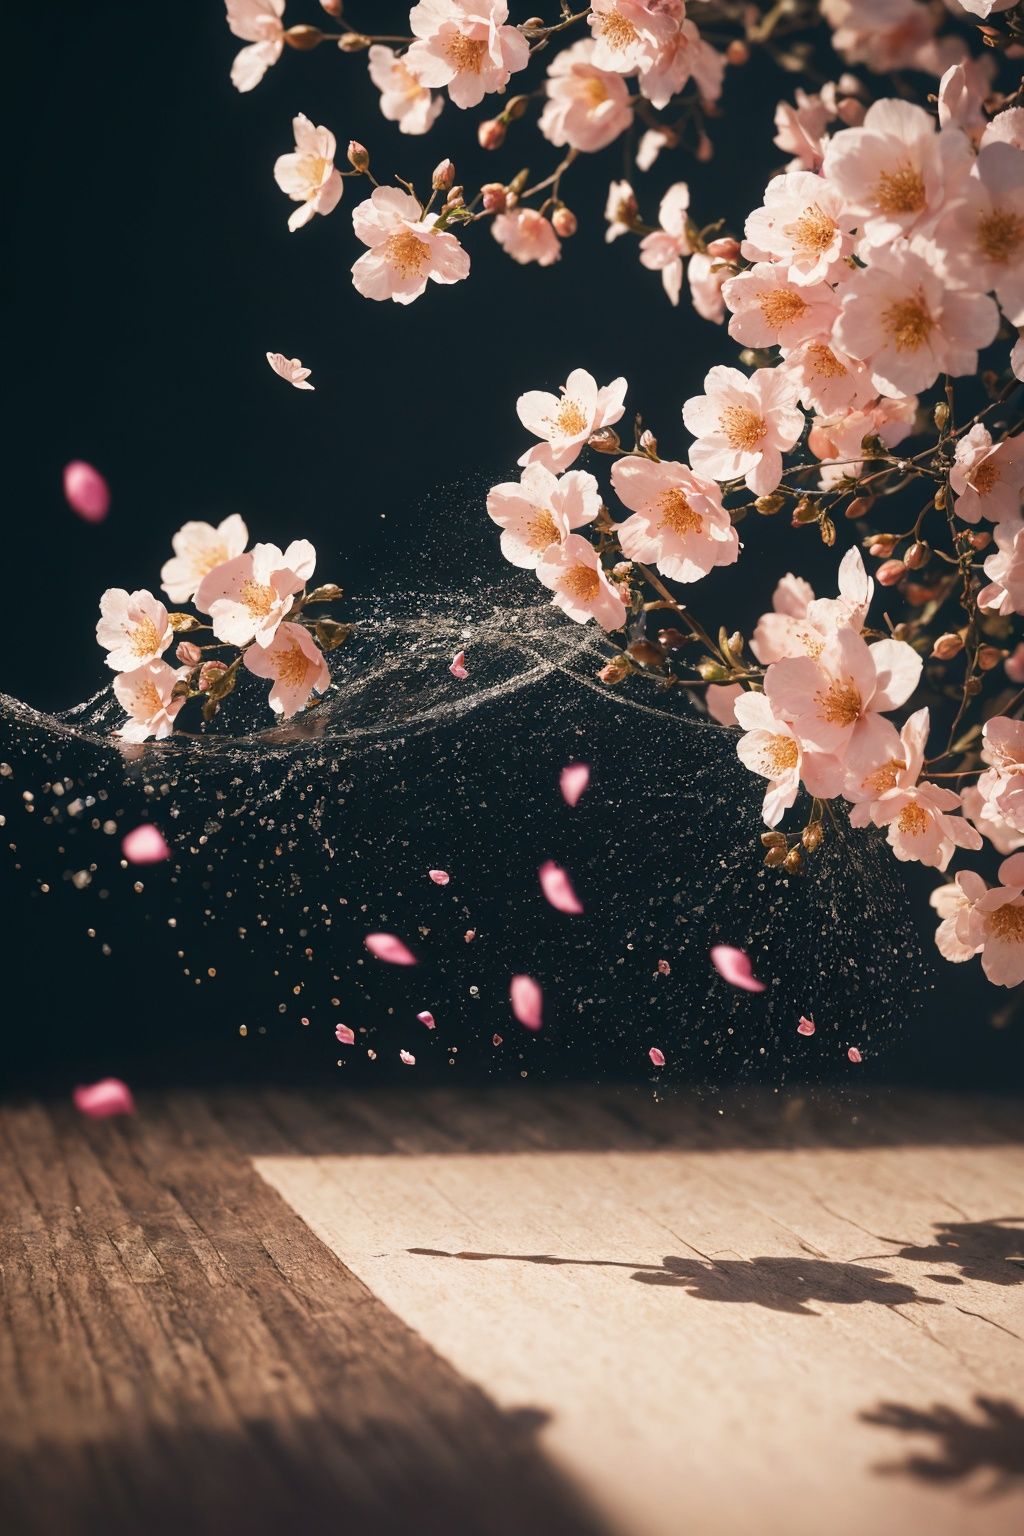 Exquisite wallpaper, 32K resolution, masterpiece, high quality, high detail, V-Ray camera, flying petals, sparkling particles, trembling splashes of details, high saturation, high contrast.